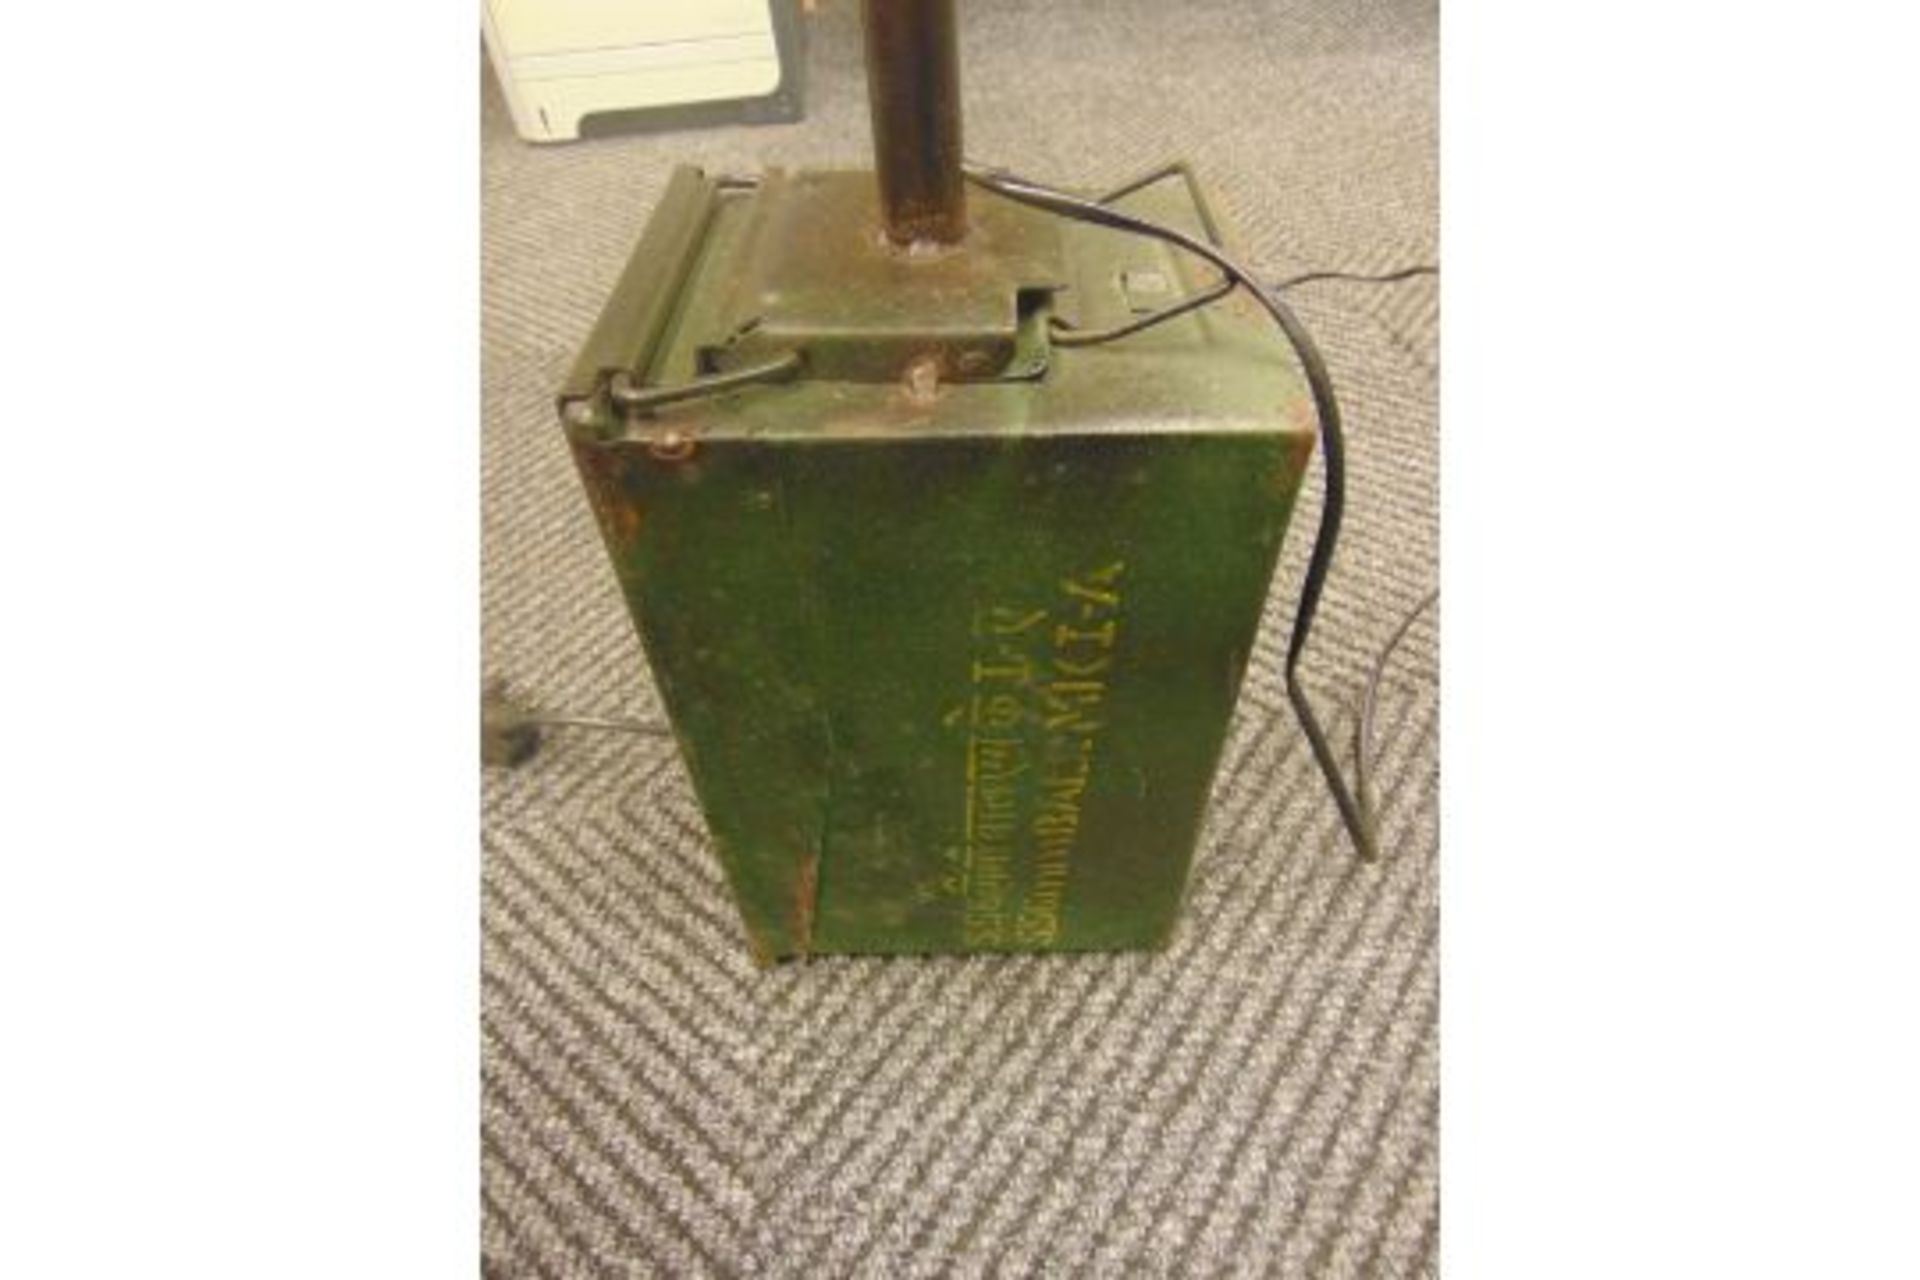 VERY UNUSUAL TABLE LAMP MADE FROM STEEL COMBAT HELMET AMNO BOX ETC - Image 5 of 6